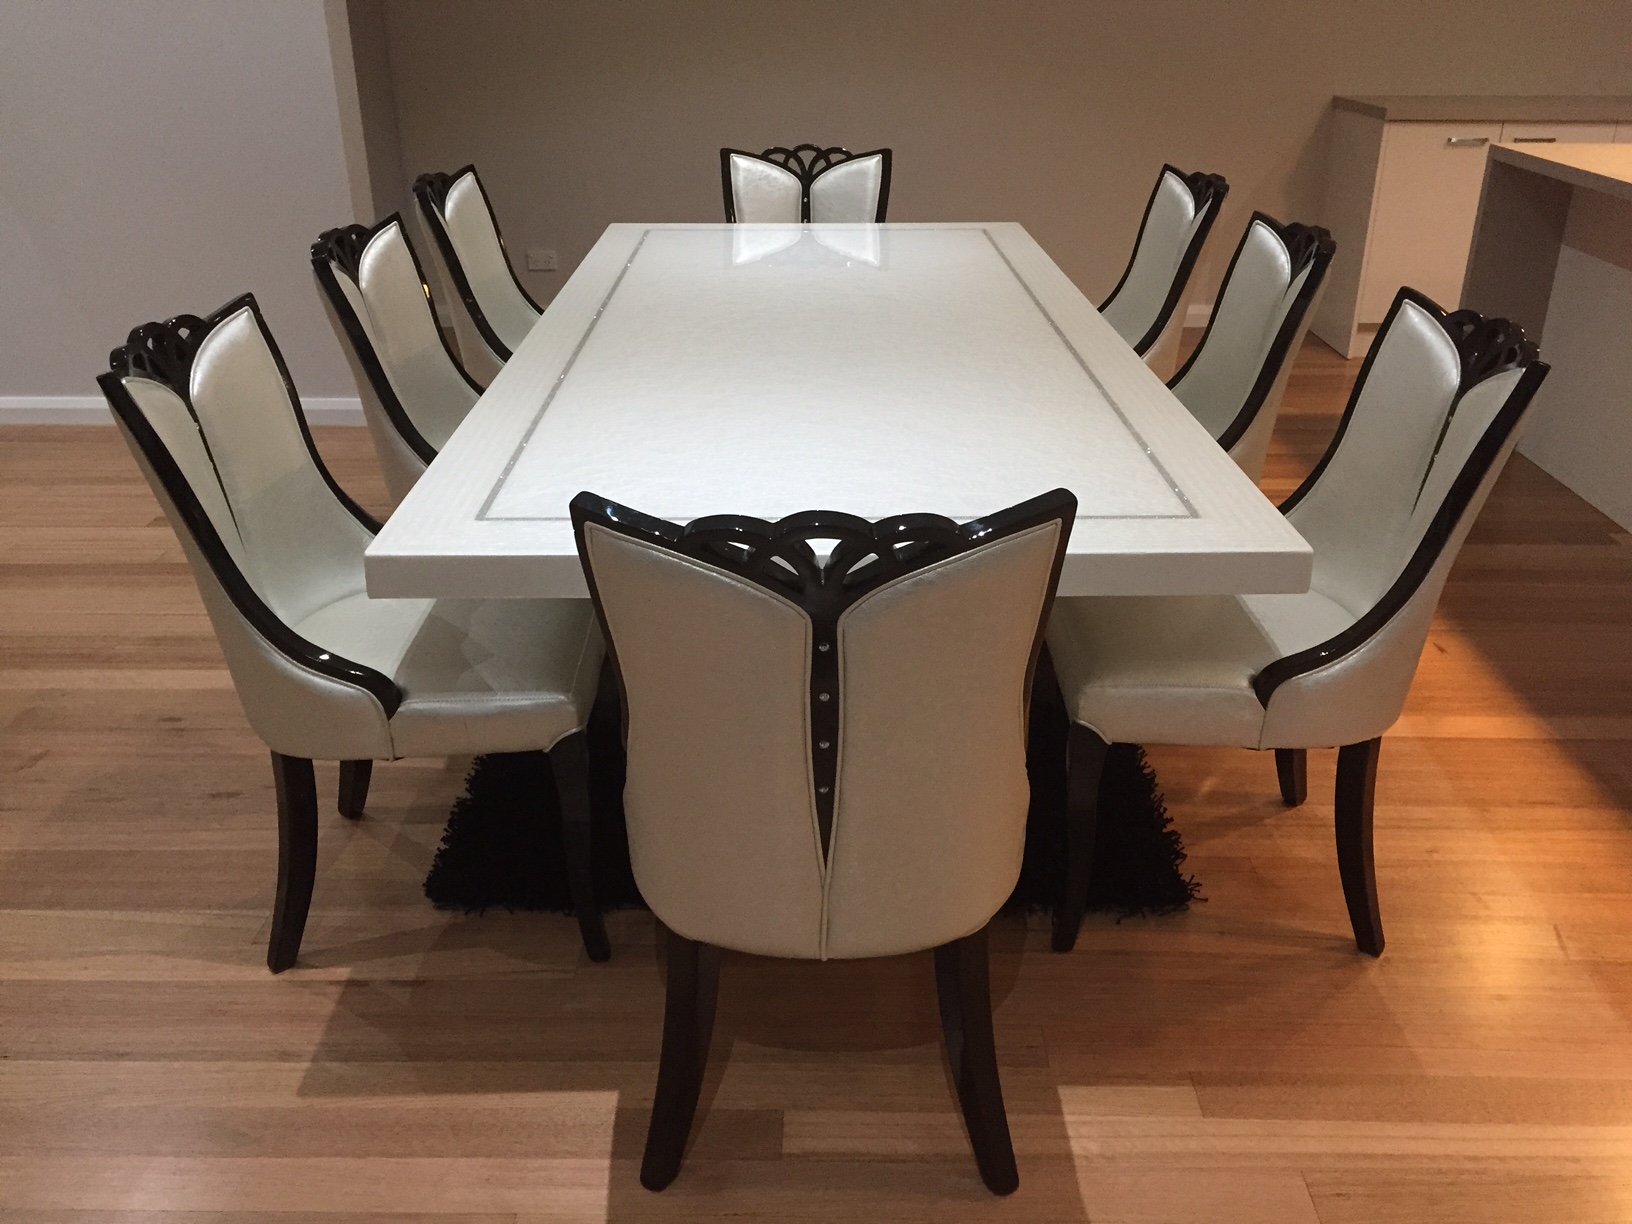 Bianca Marble Dining table with 8 Chairs | Marble King High Dining Room Tables